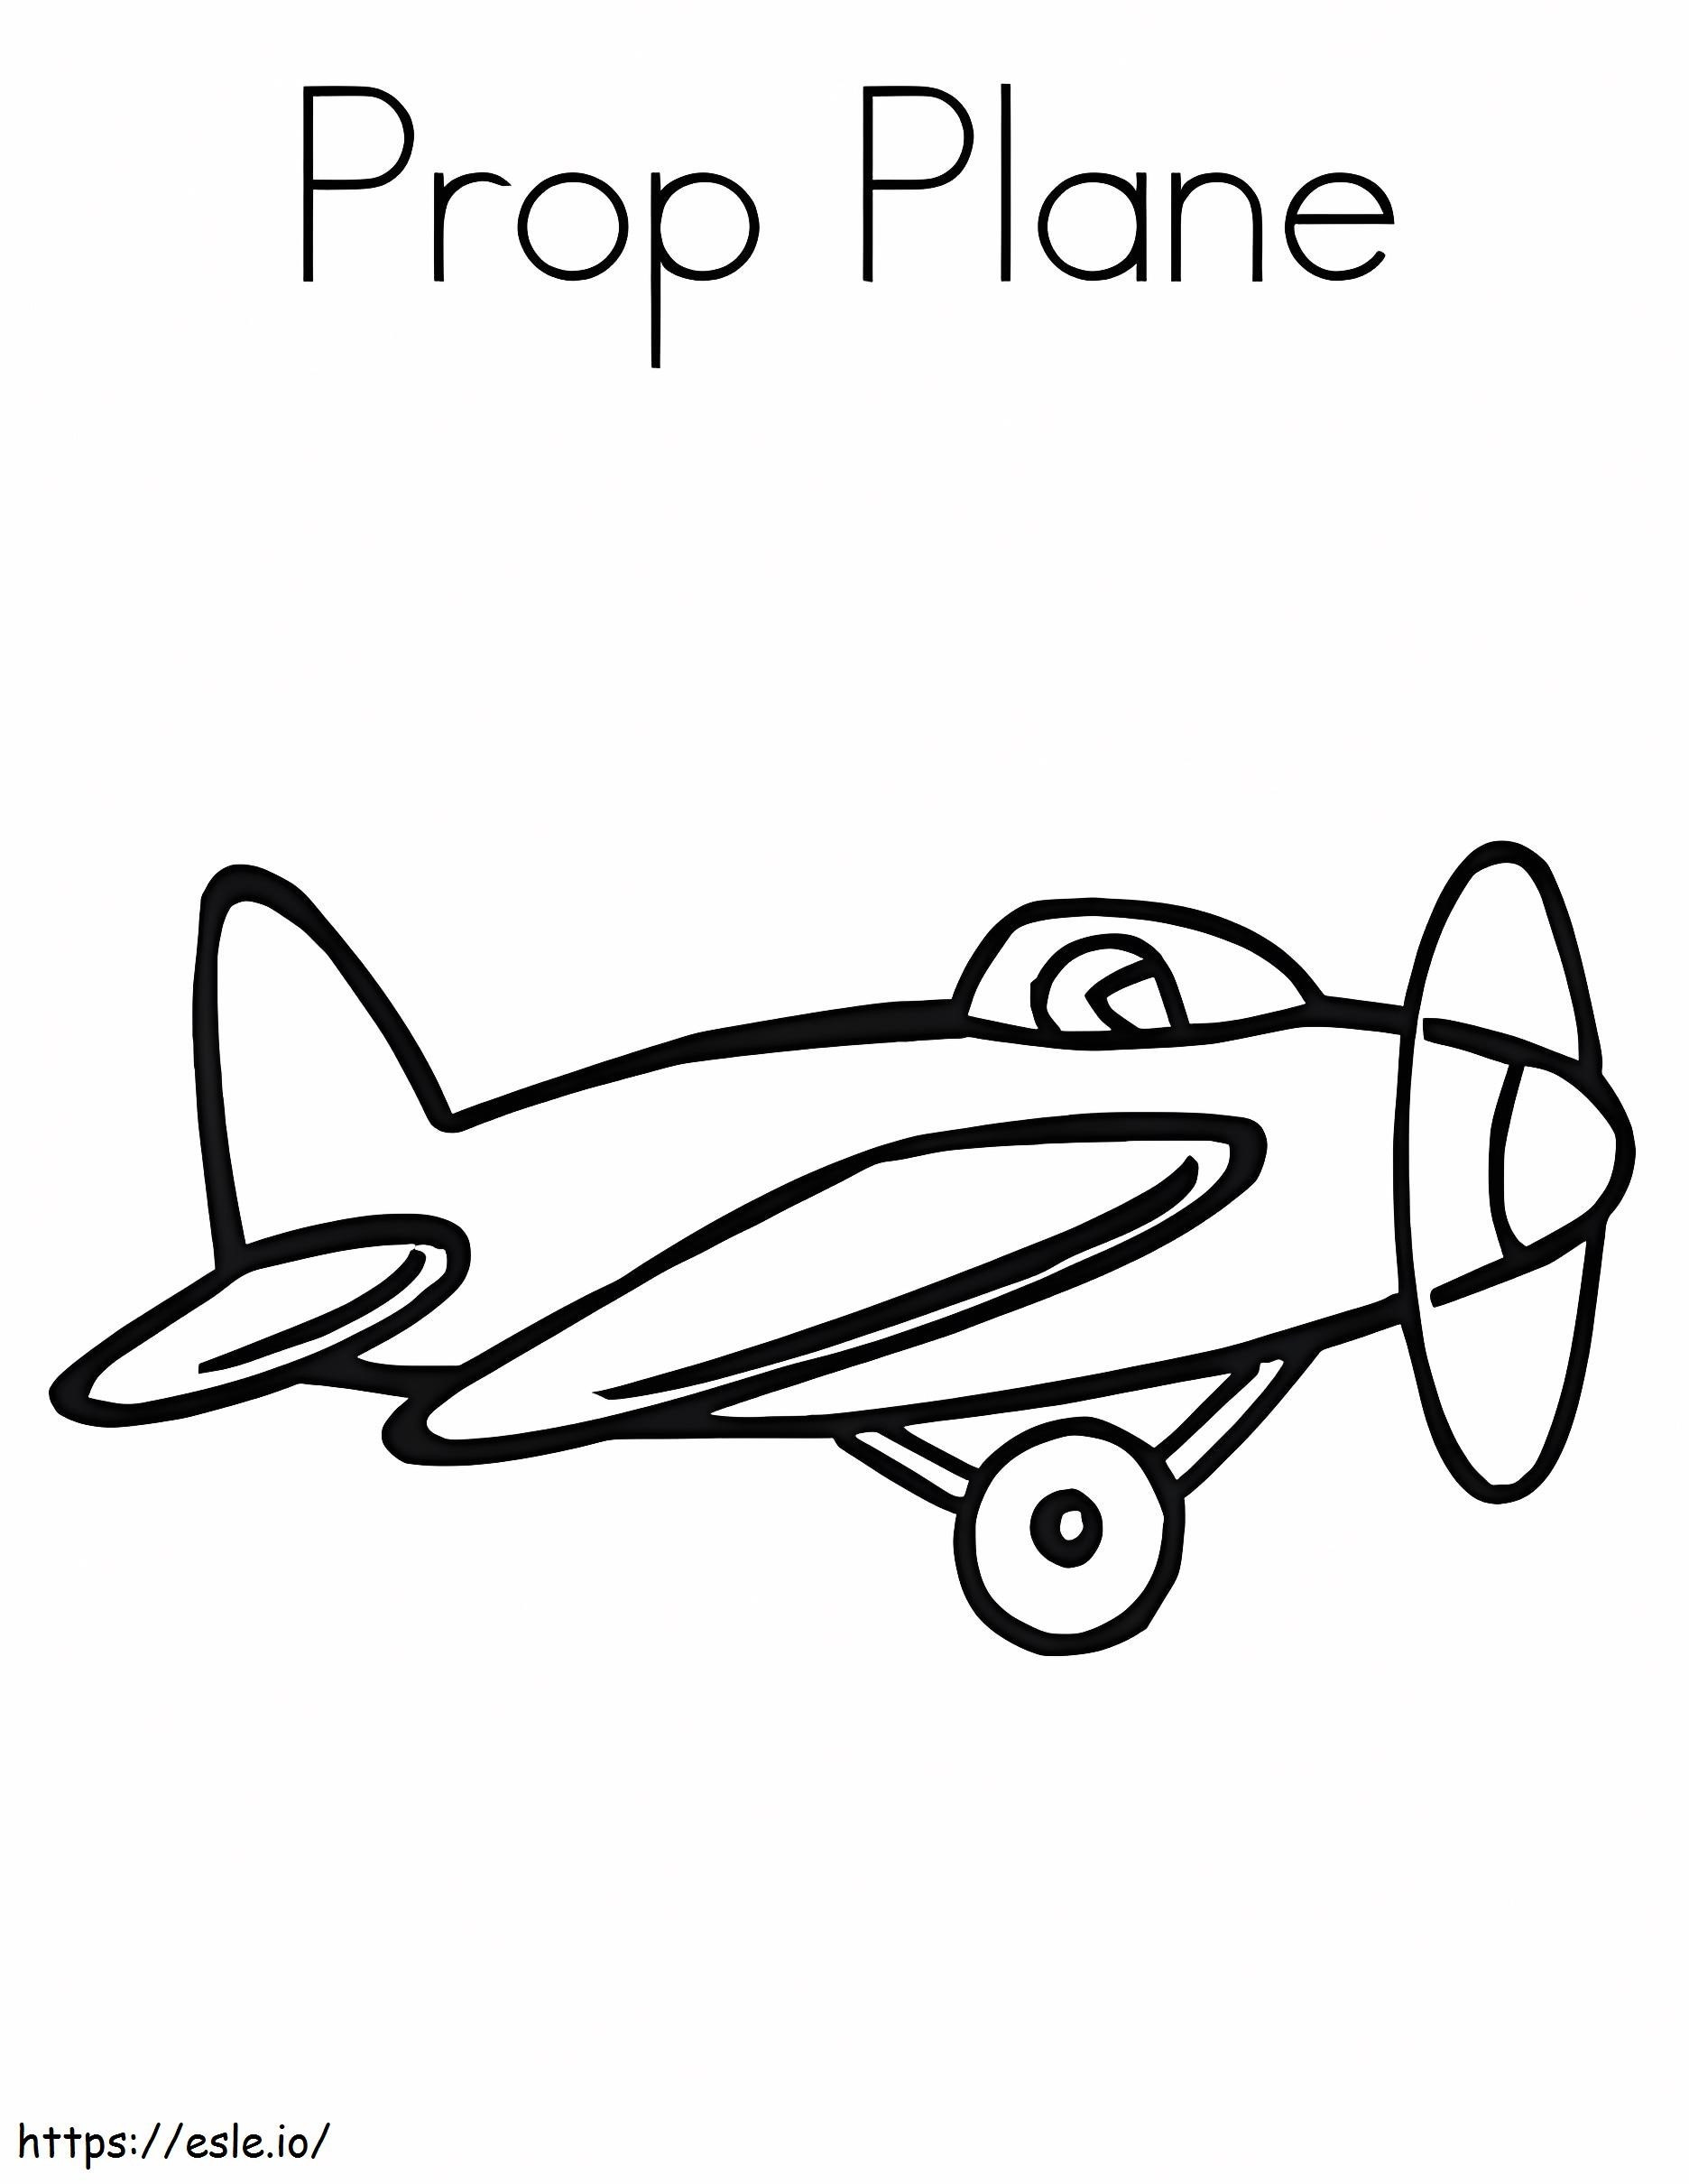 Prop Aircraft coloring page